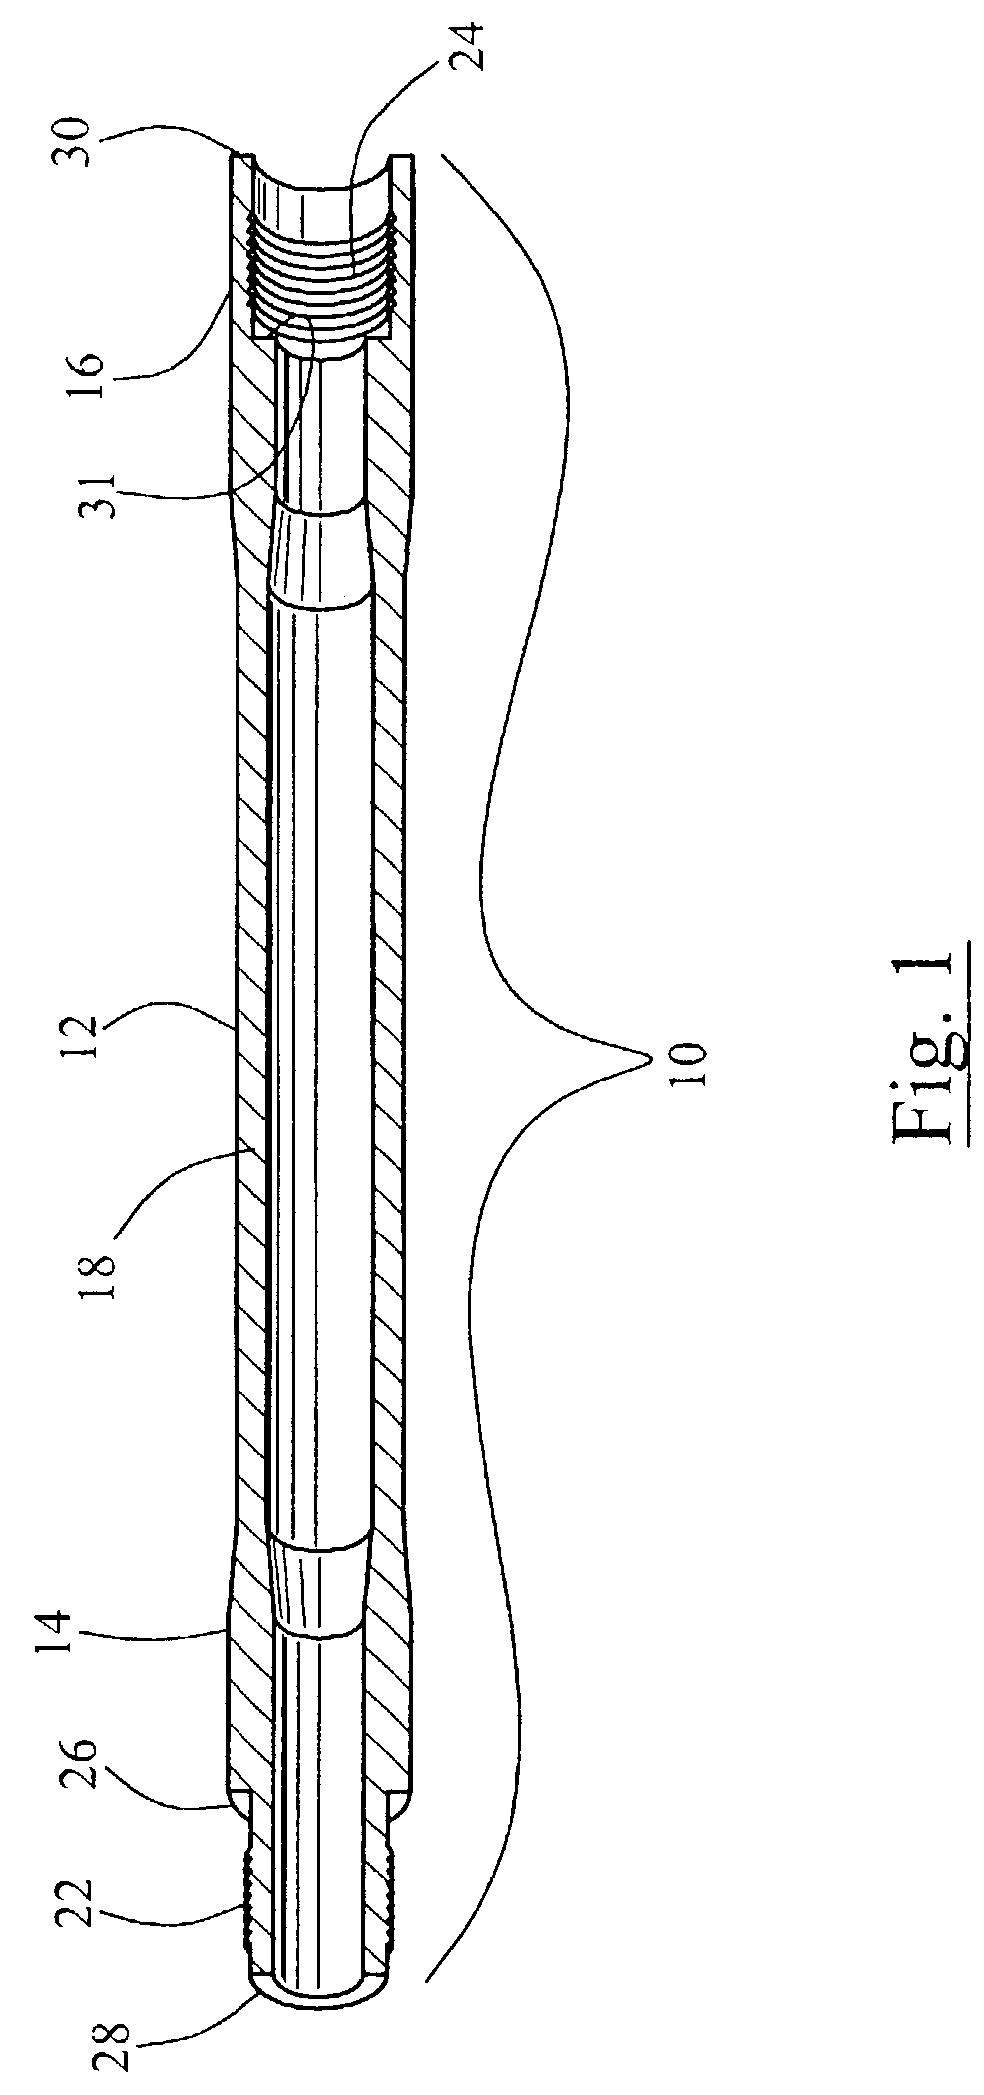 Method and apparatus for transmitting and receiving data to and from a downhole tool